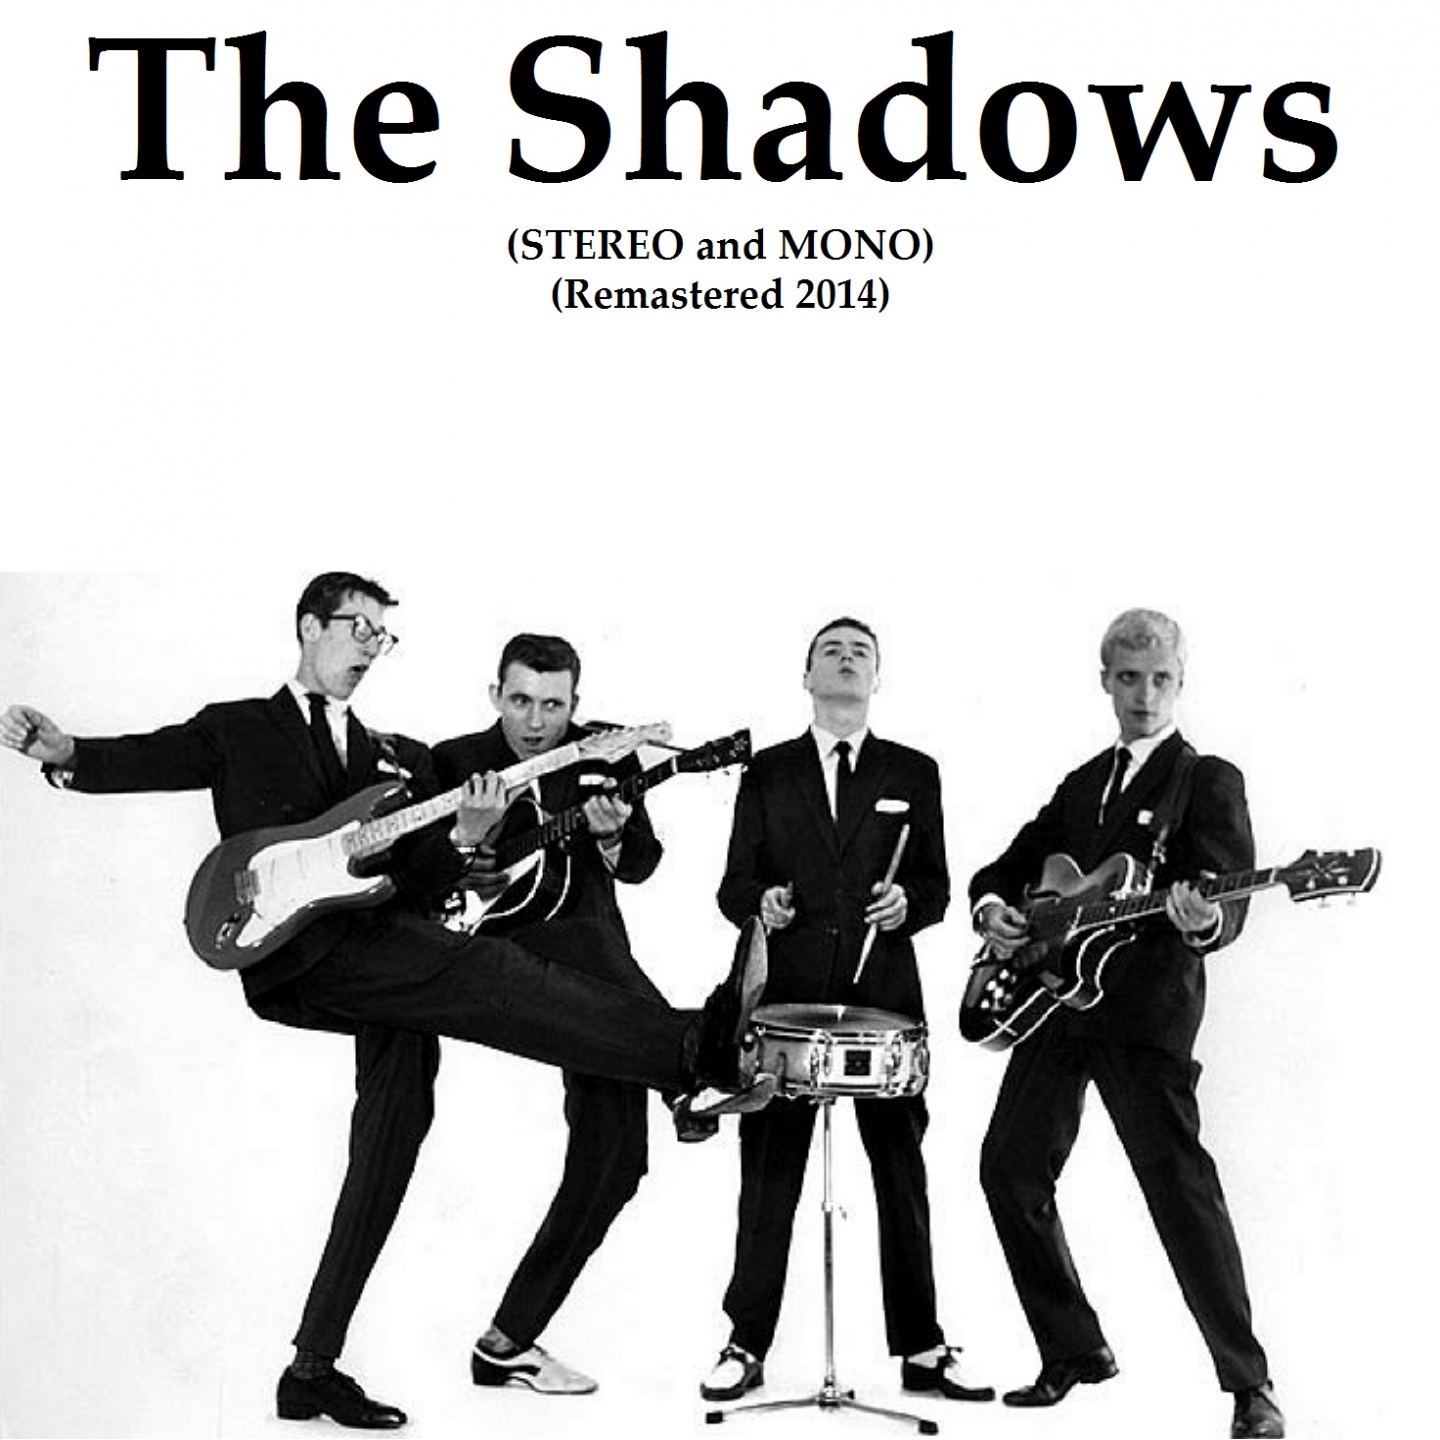 The Shadows (Stereo and Mono) (Remastered 2014)